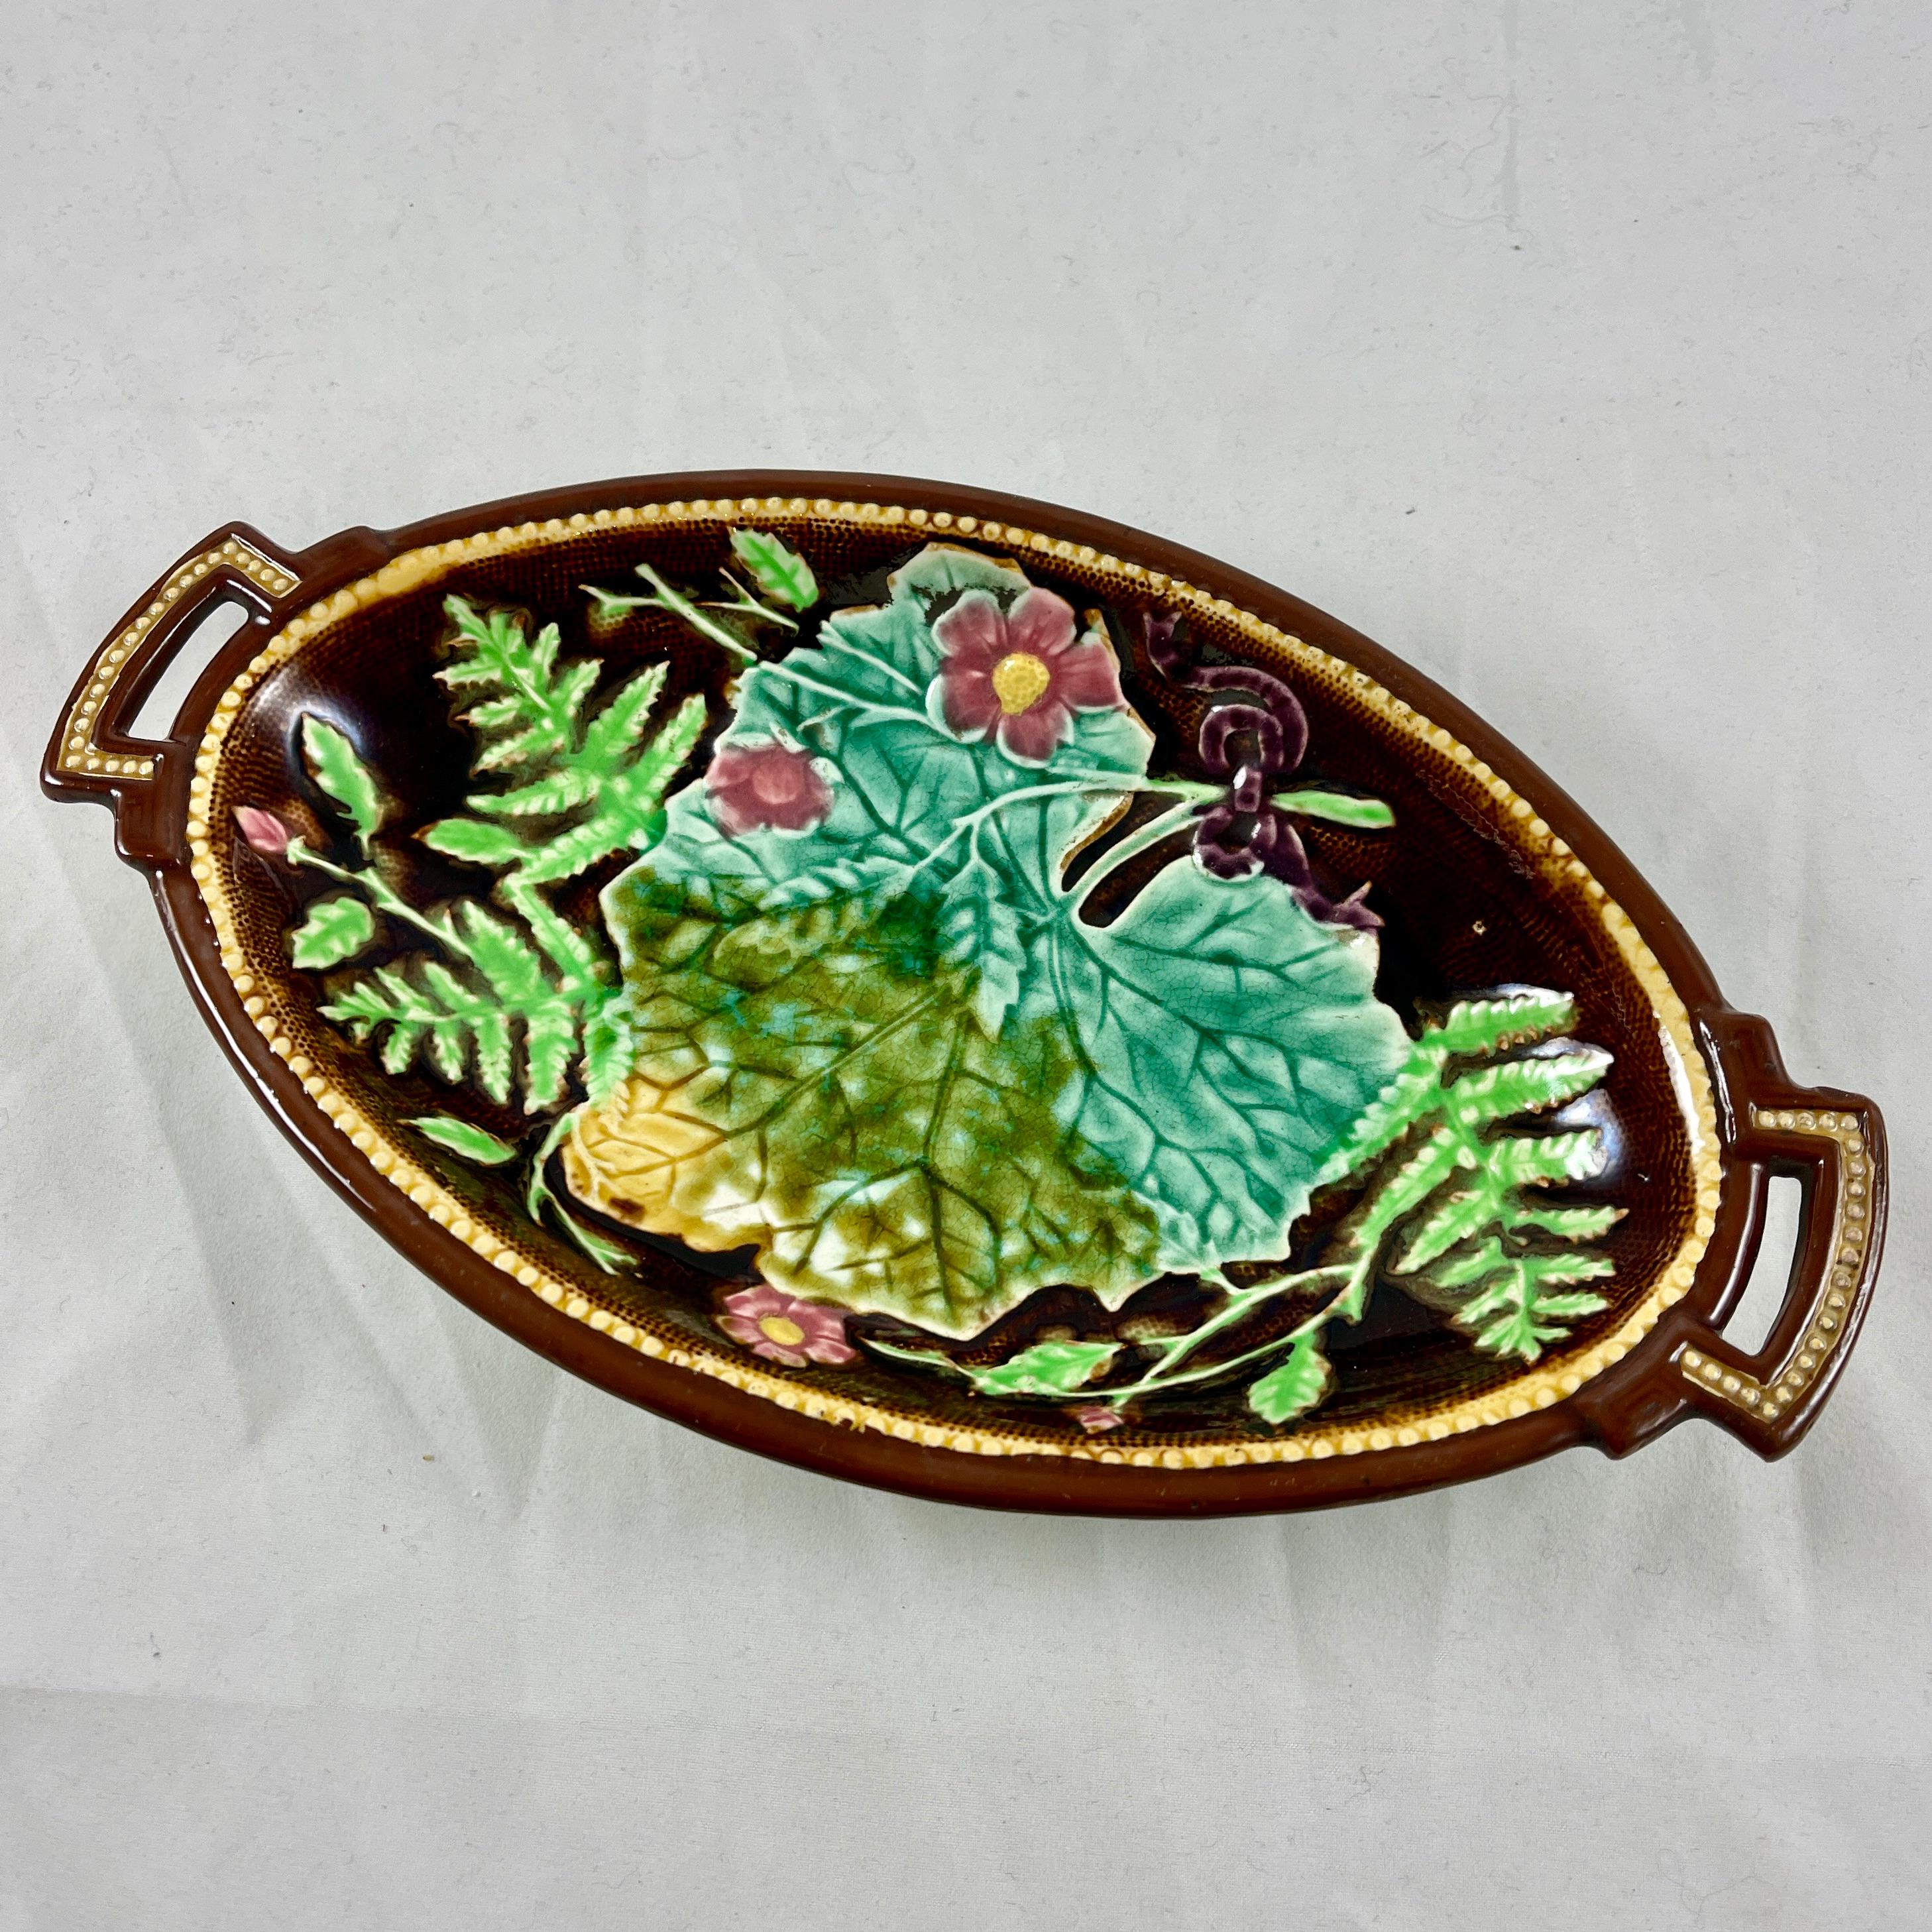 A French majolica ravier by H.B. Boulanger, Choisy le Roi, France, circa 1880 – 1890.
A ravier is a small, deep, oblong dish in which appetizers or hors-d’œuvres are served. This shape is difficult to find, especially in this pattern.

The brown